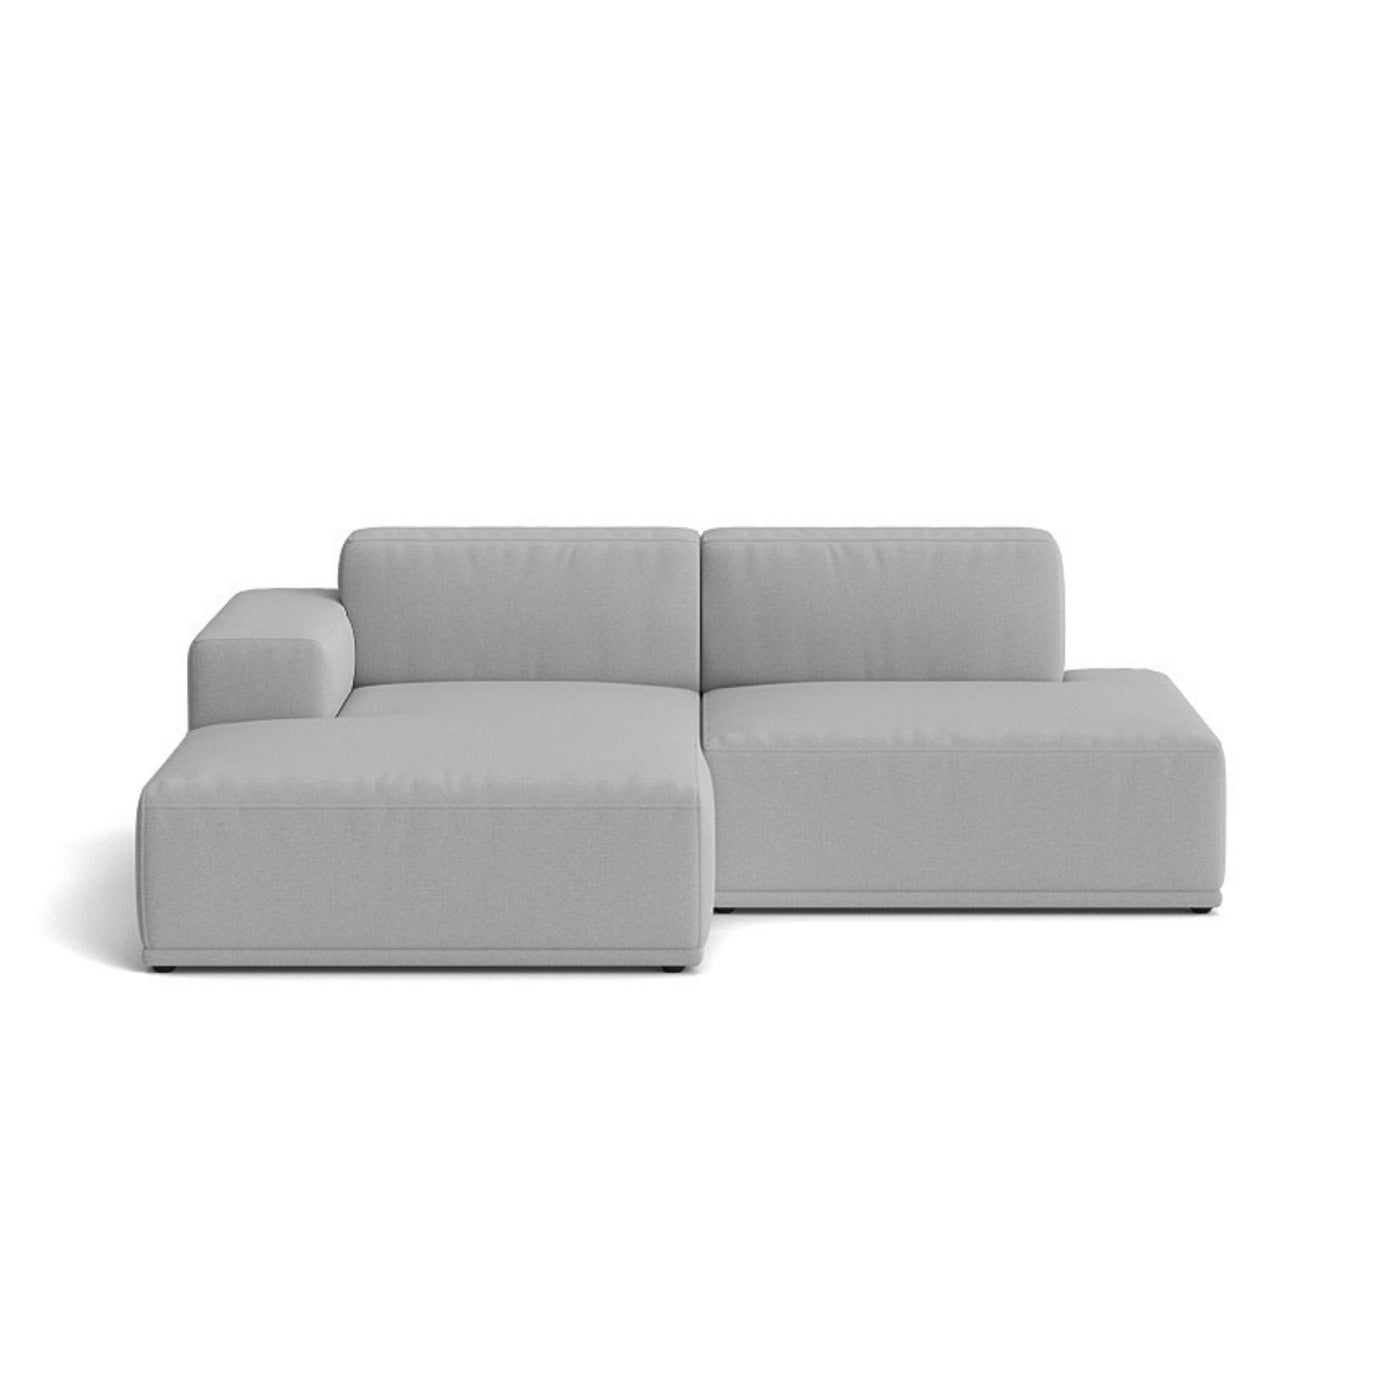 Muuto Connect Soft Modular 2 Seater Sofa, configuration 3. made-to-order from someday designs. #colour_steelcut-trio-133